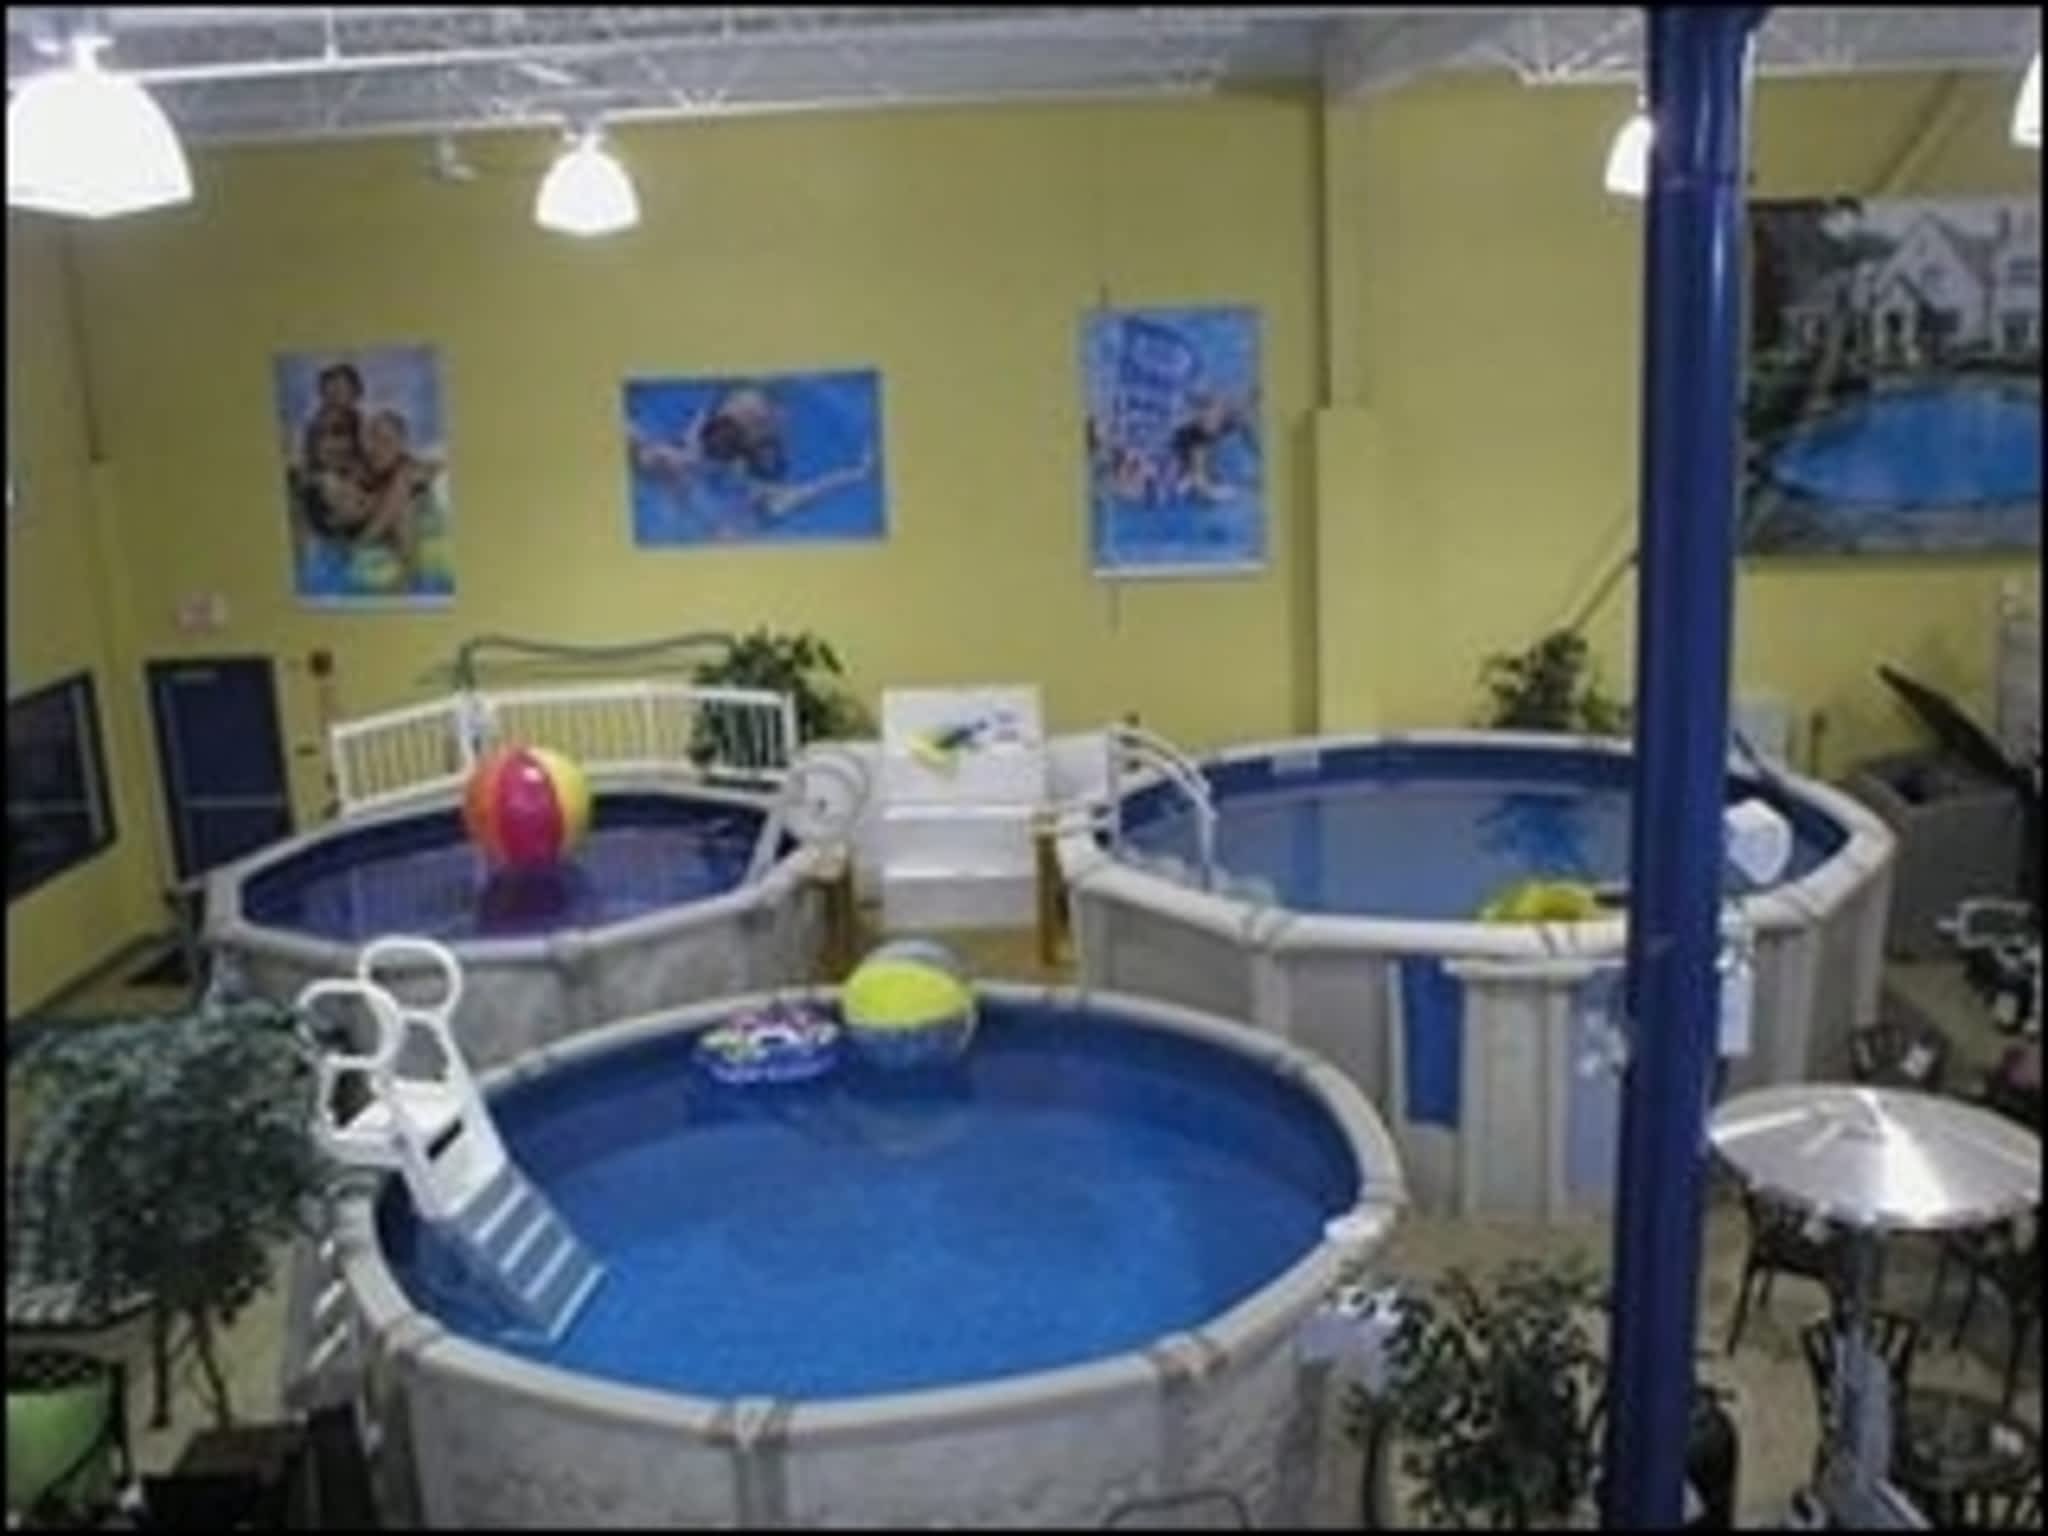 Club Piscine Super Fitness - Nepean, ON - 285 West Hunt Club Rd | Canpages